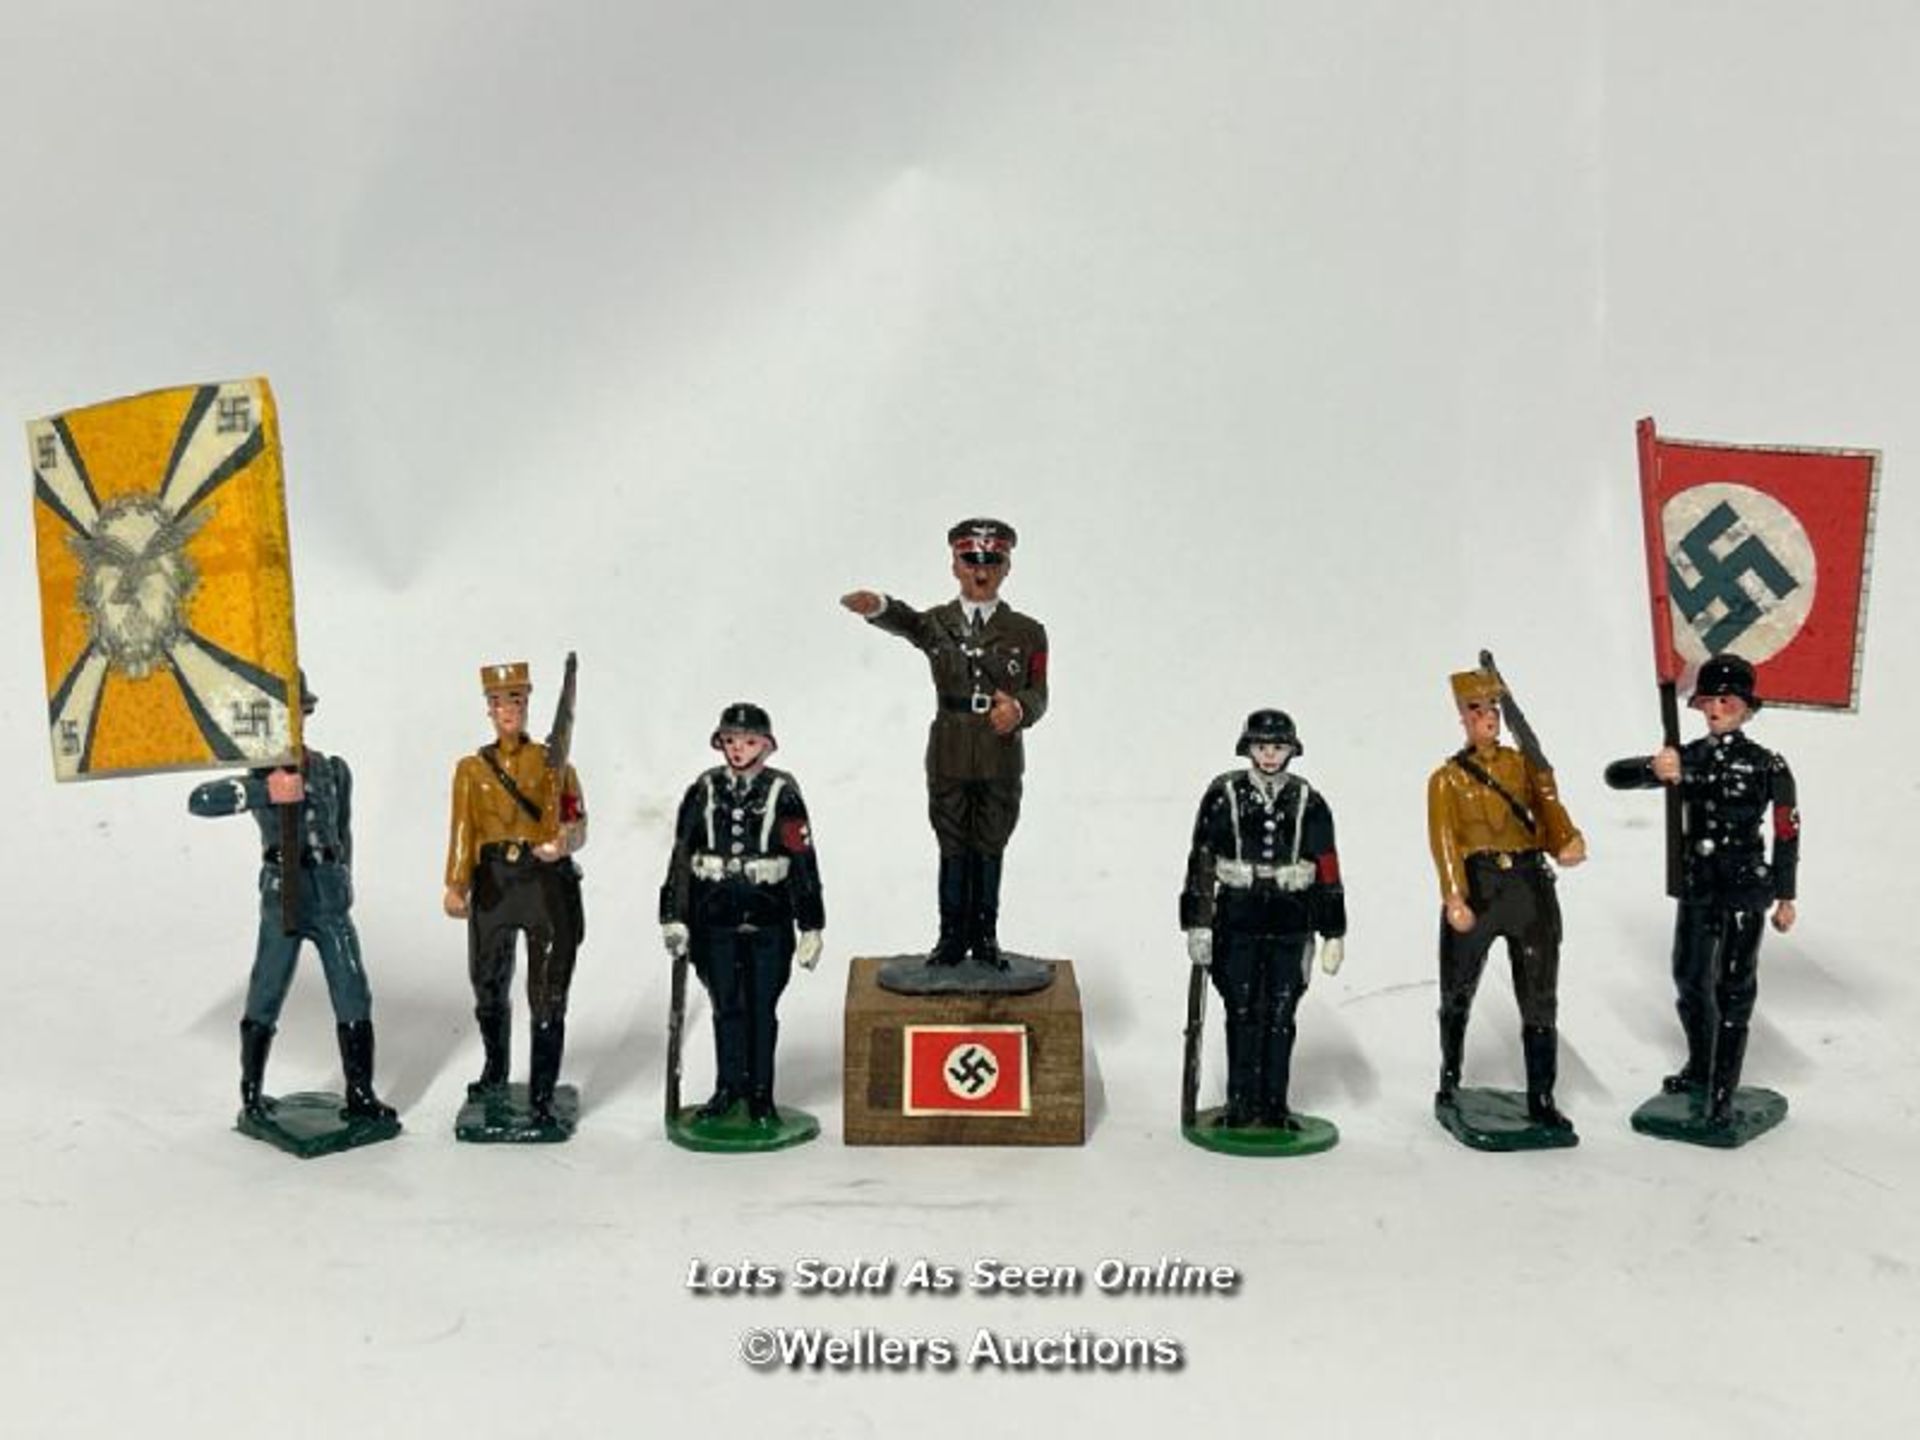 Seven hand painted lead figures in WWII German uniform / AN5